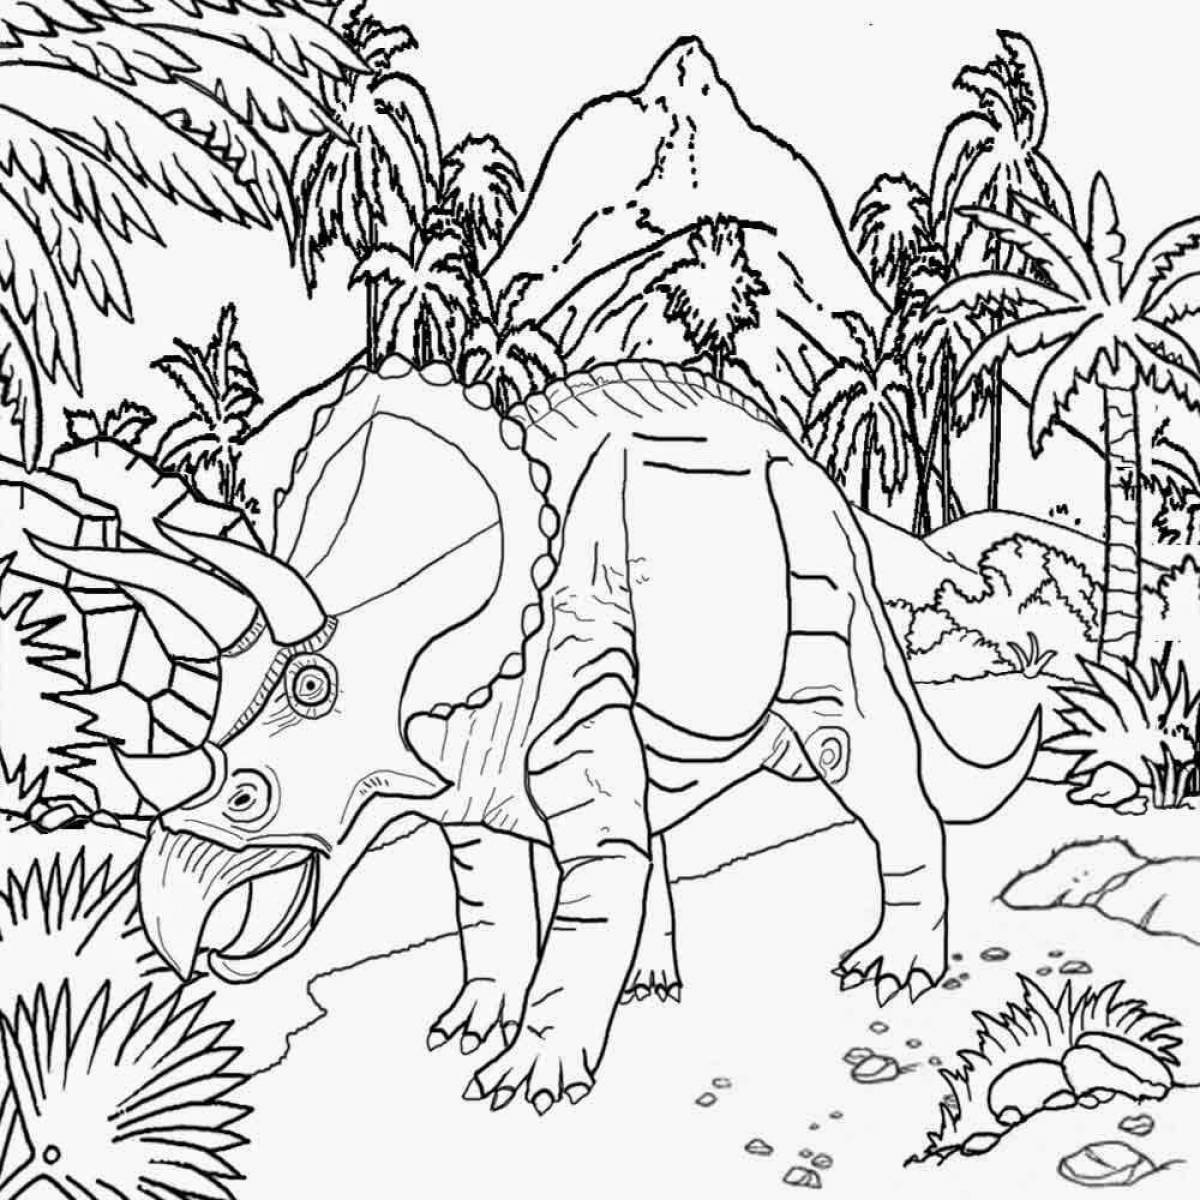 Majestic jurassic park coloring page